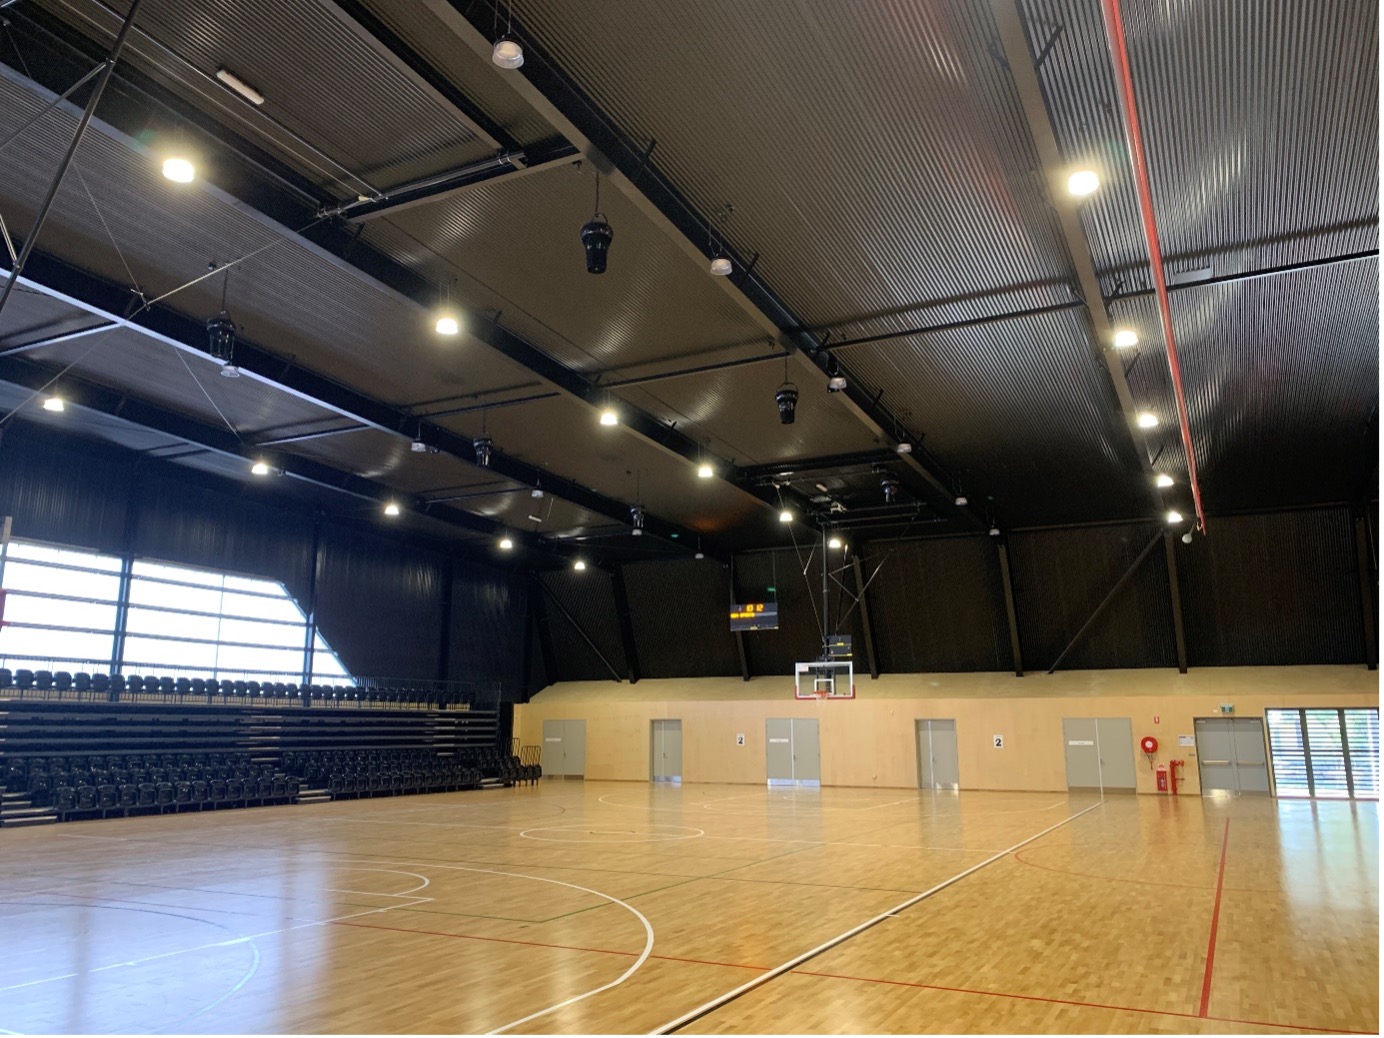 Airius Model 60 EC fans in a sports hall in NSW